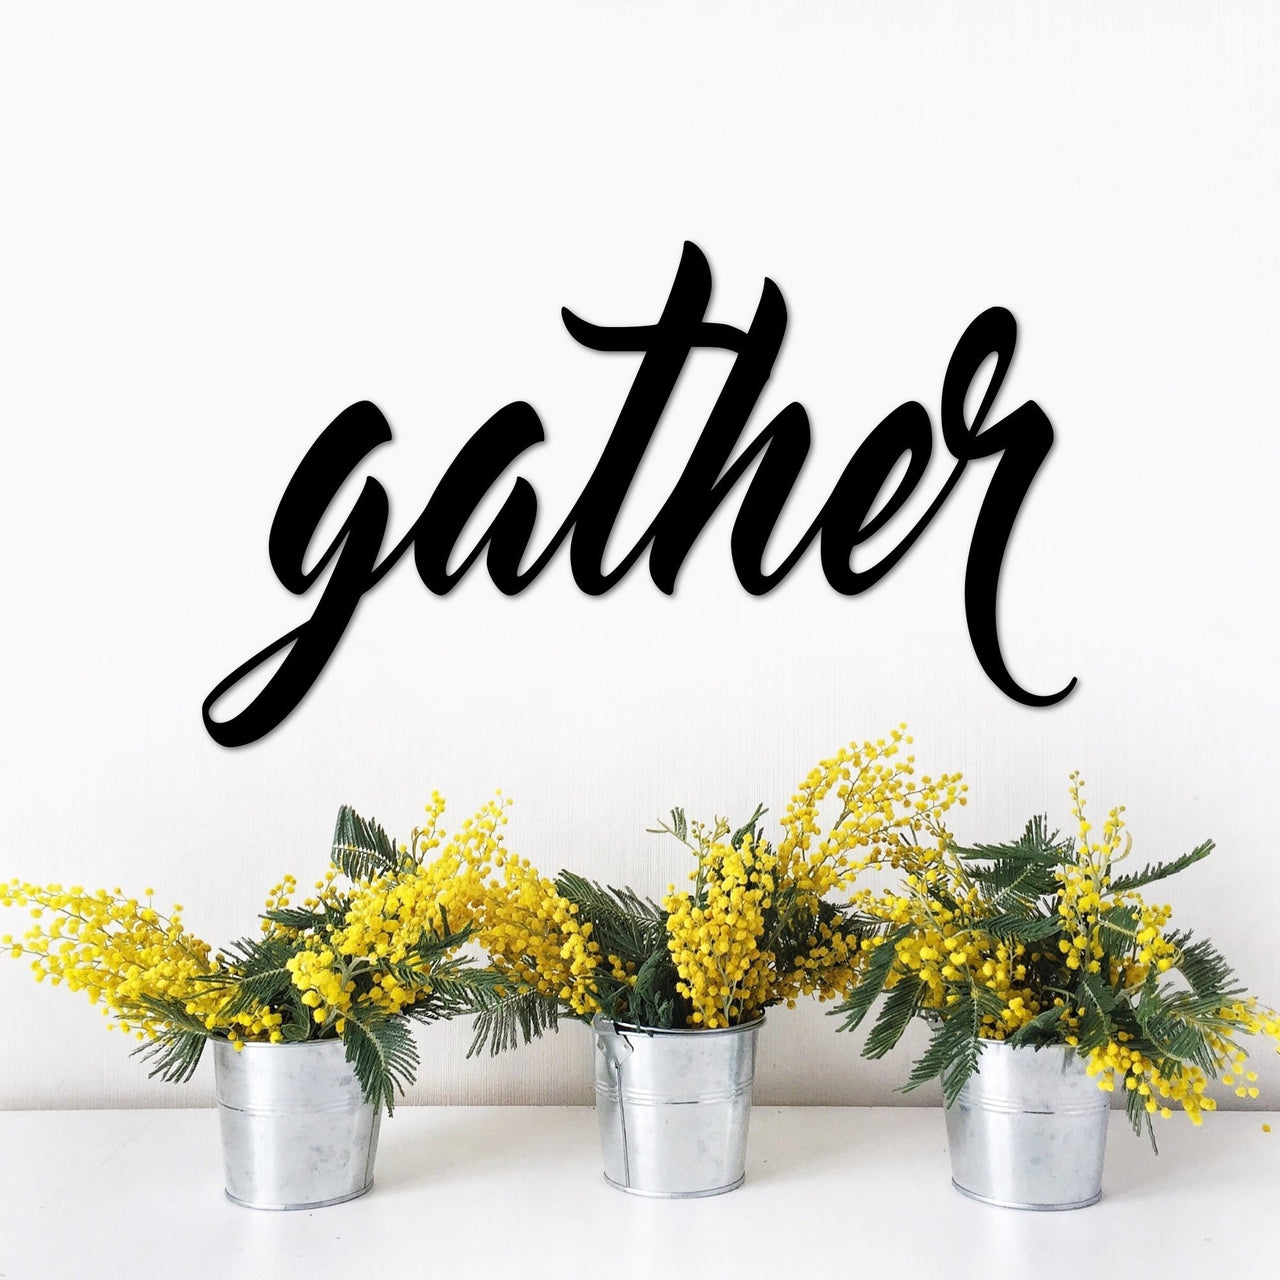 Gather Metal Sign | Wall Decor | Script Gather Cutout Sign | Dining Room Sign | Family Sign | Gather in Metal Letters | Kitchen Table Sign